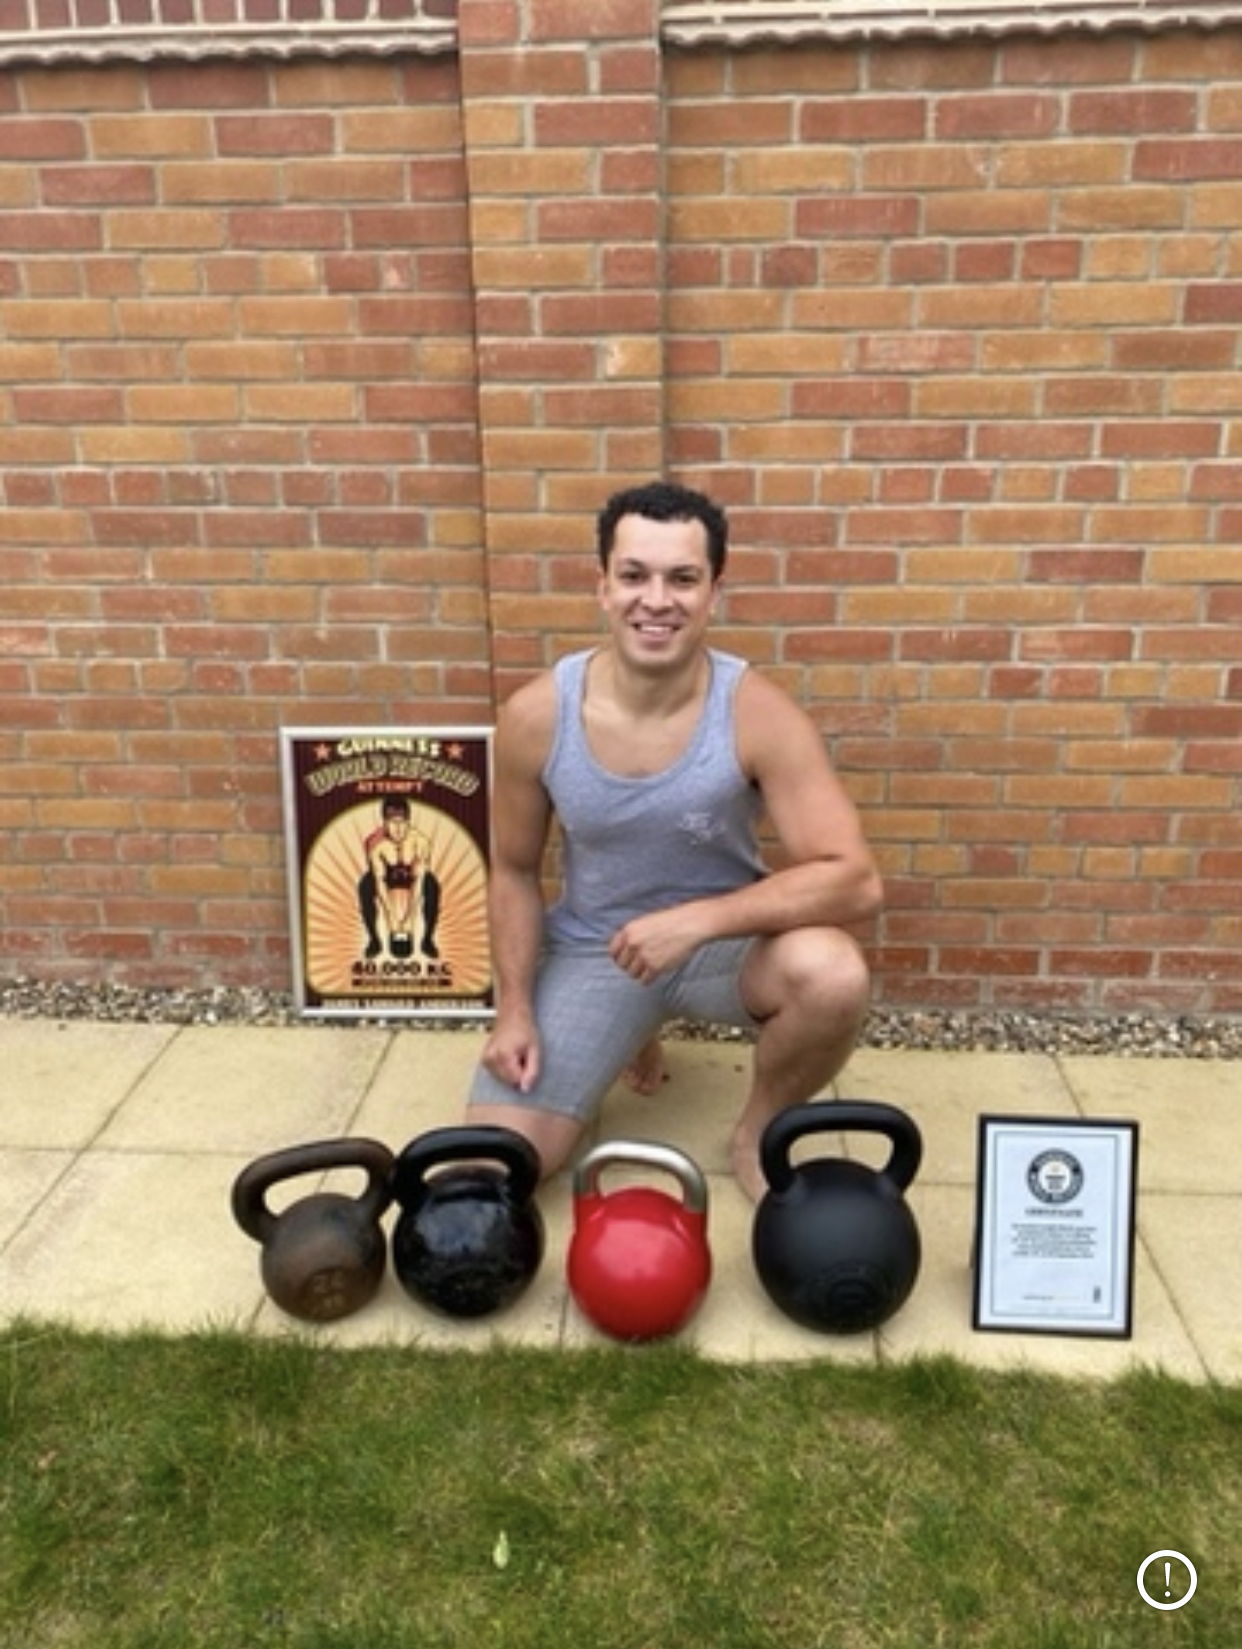 New Father Attempts World Record Kettlebell Lift (40,000 Kilos In Under One Hour) Raising Funds For Local Hospital 